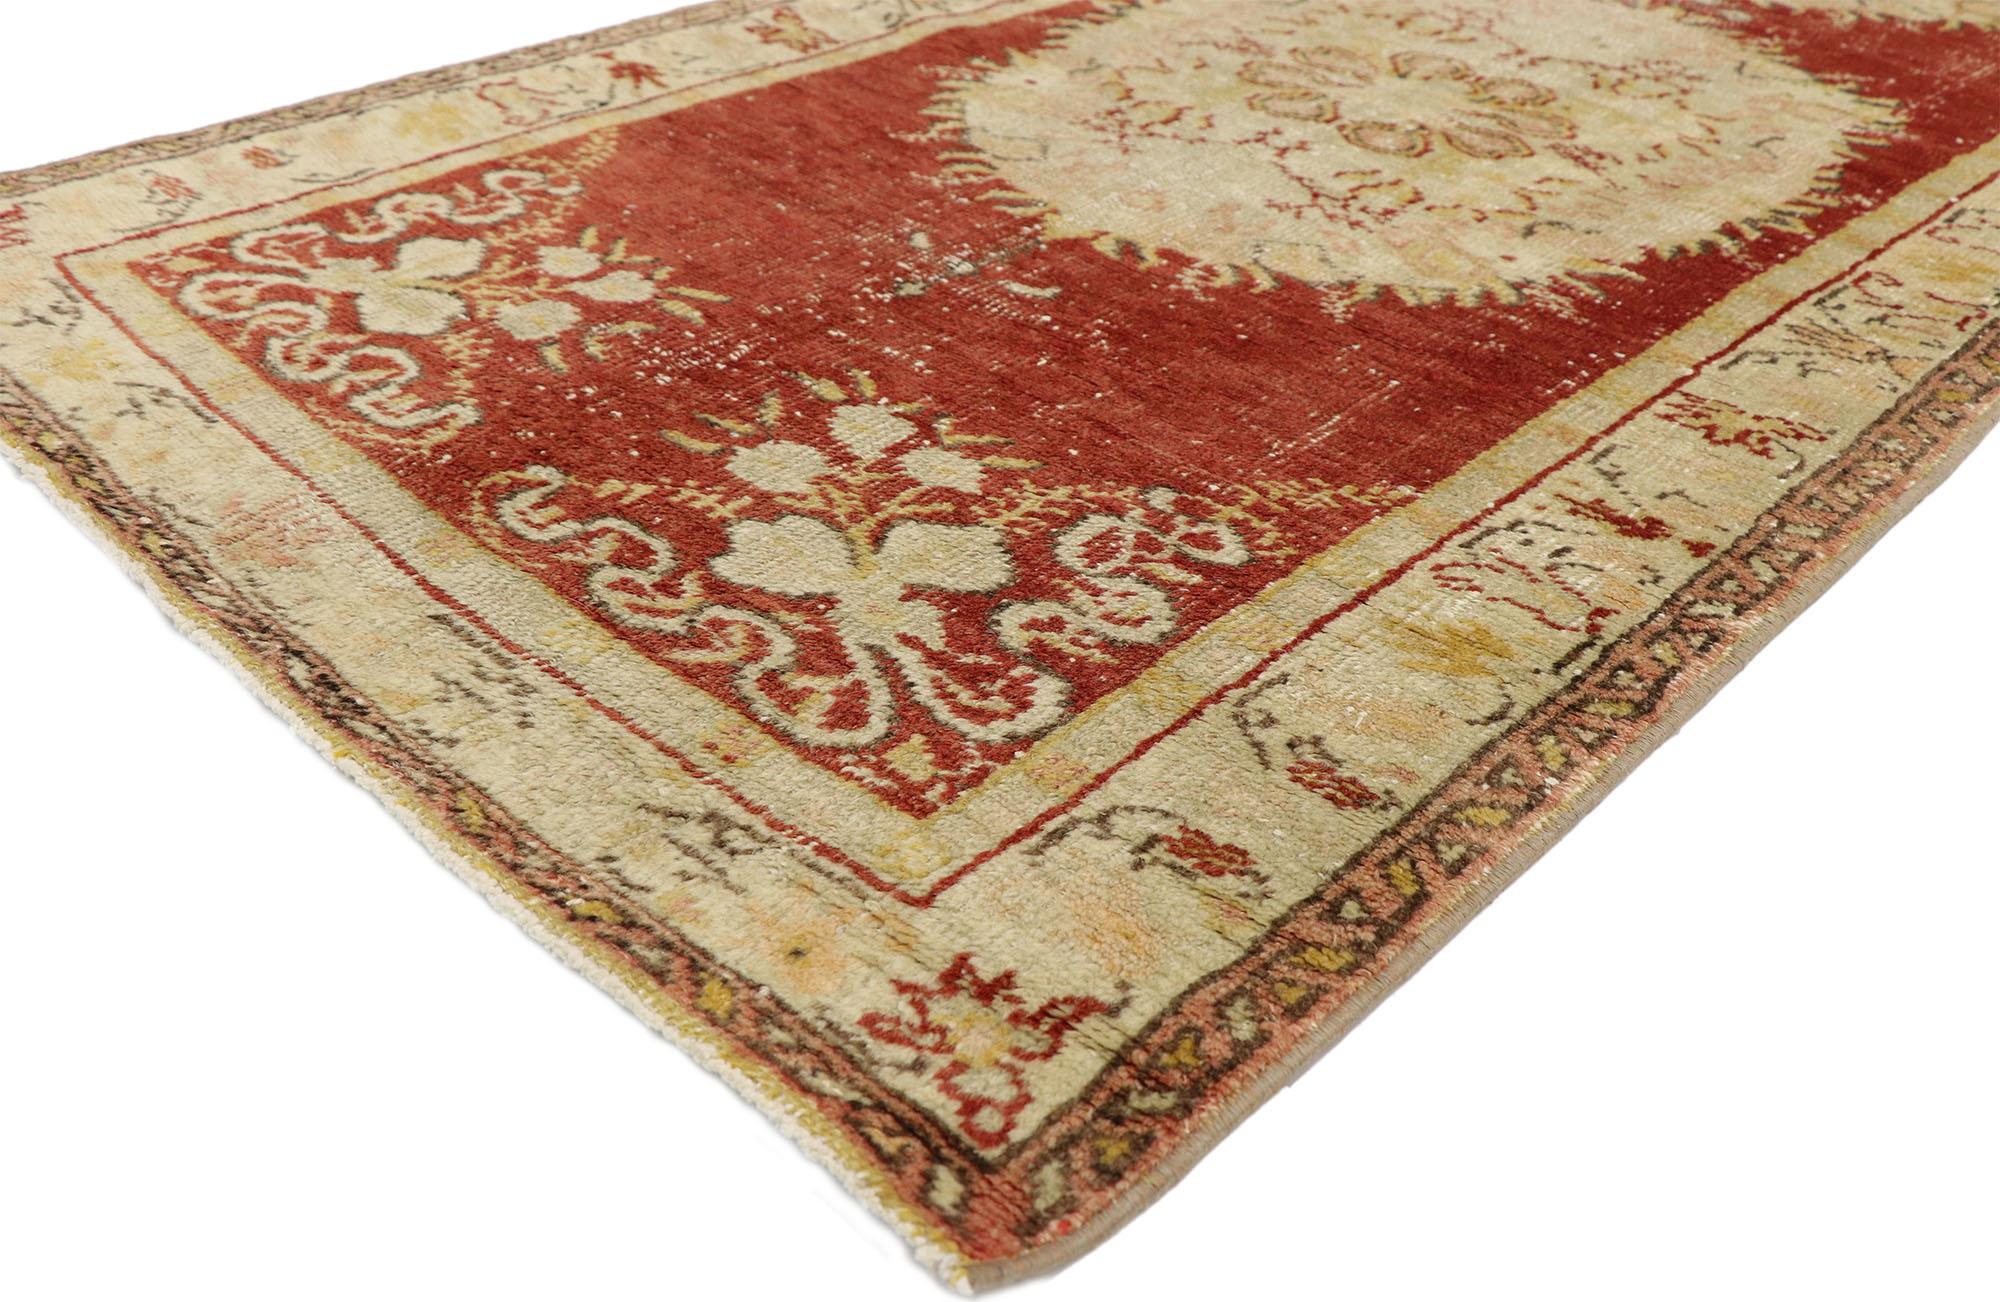 51662 Distressed Vintage Turkish Oushak Runner with French Provincial and Rococo Style. French Provincial and Rococo Romanticism meets timeless Anatolian tradition in this Classic style hand knotted wool distressed vintage Turkish Oushak runner. Set